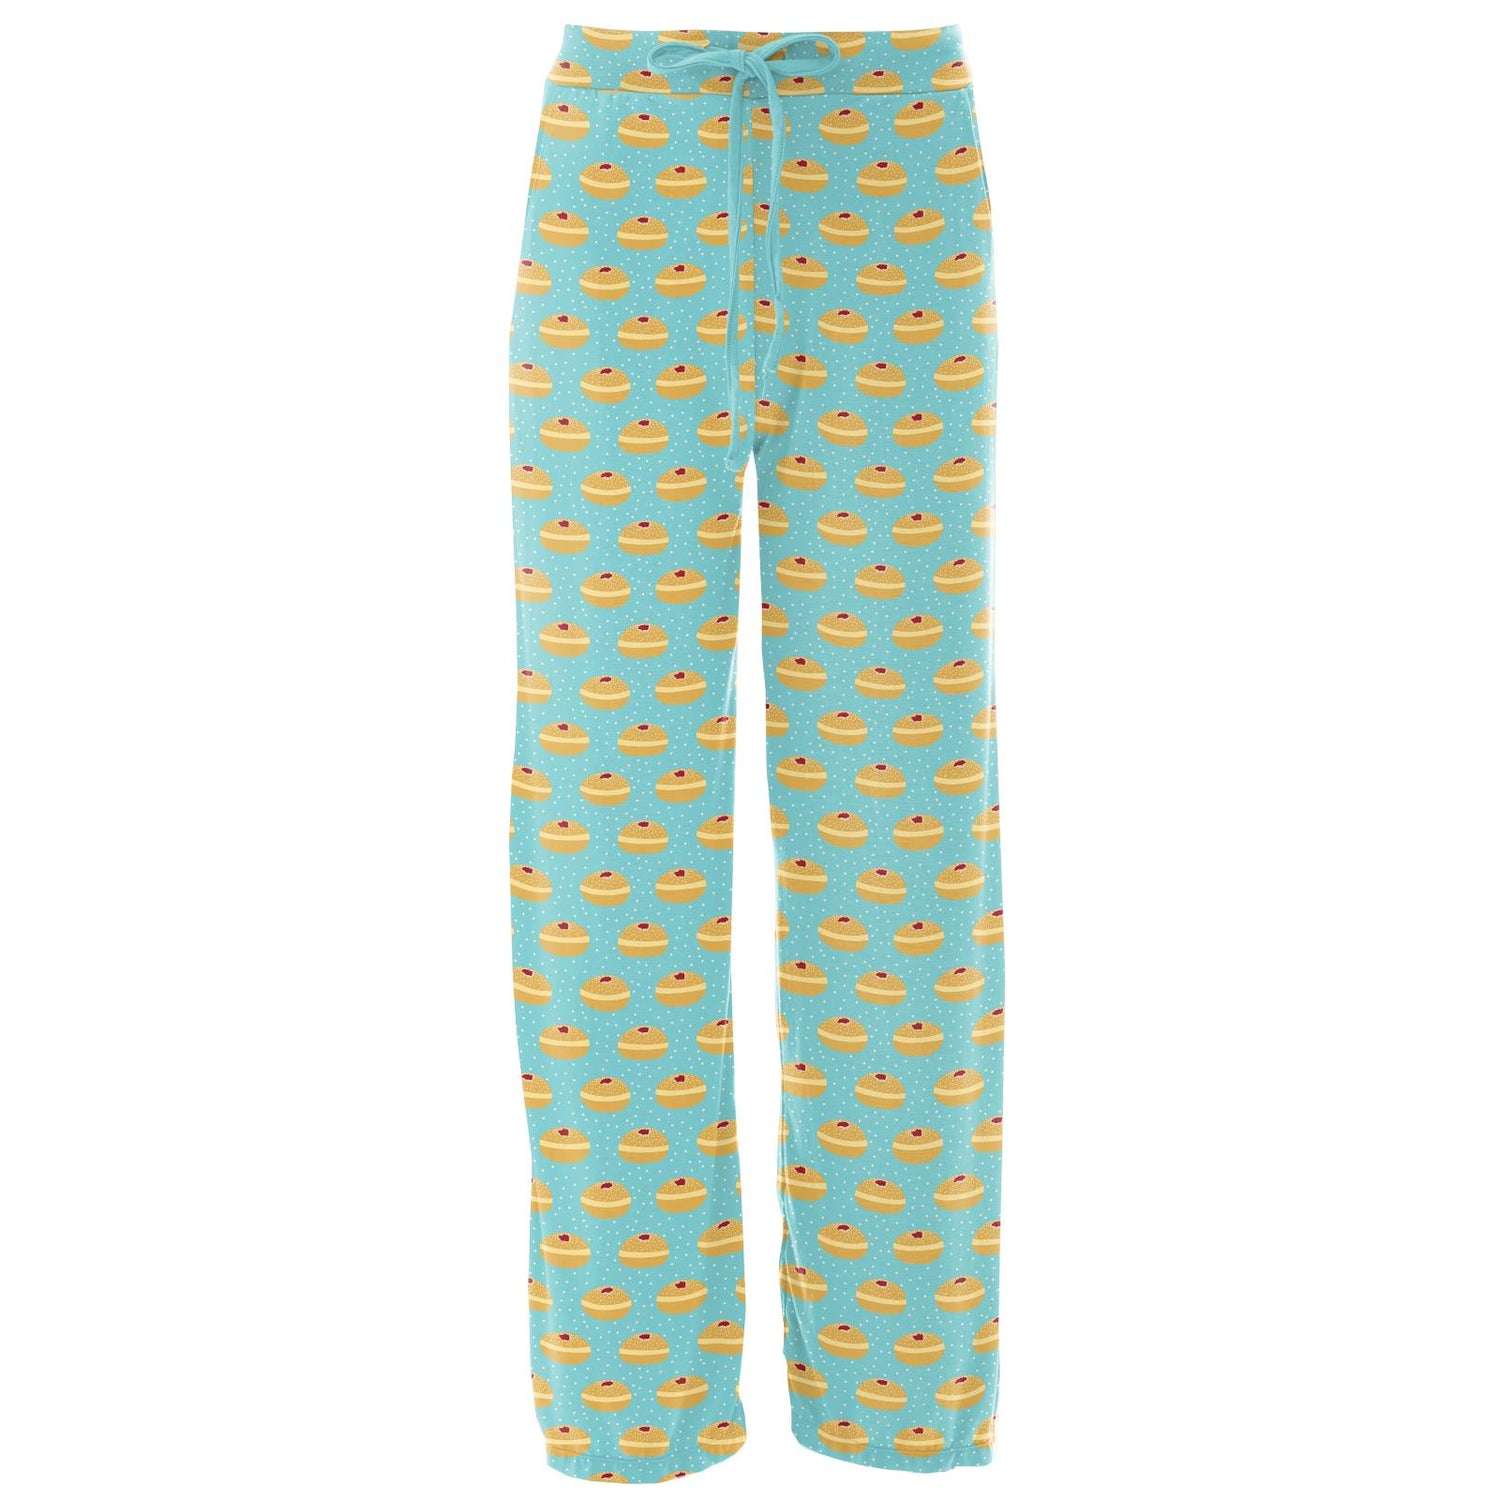 Women's Print Lounge Pants in Iceberg Jelly Donuts